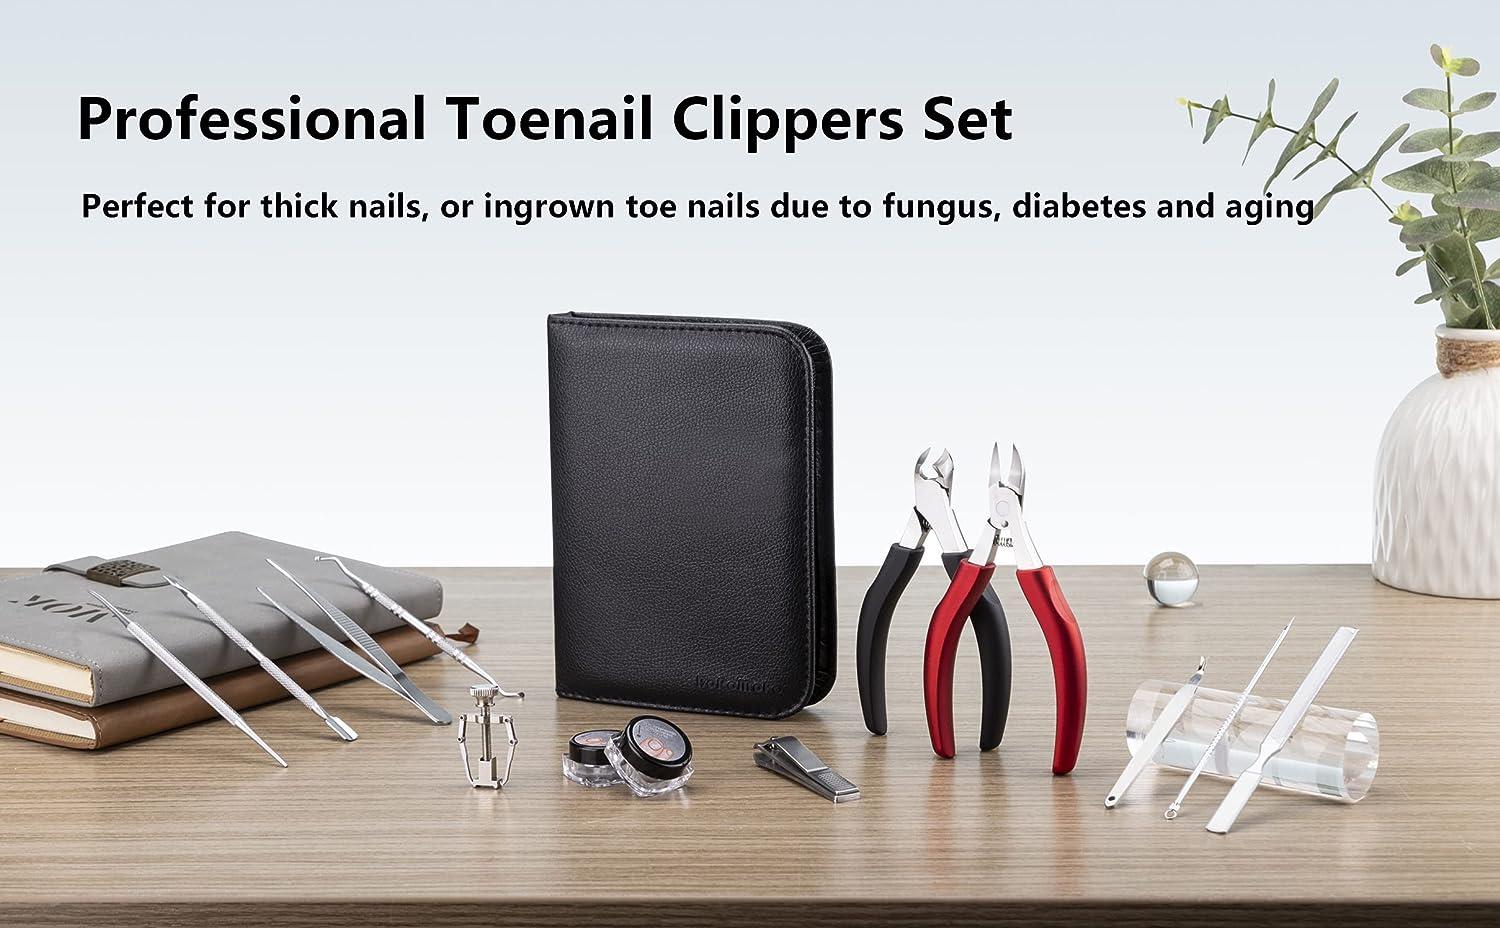 Toenail Clippers Podiatrist Toe Nail Clippers Set for Thick Nails